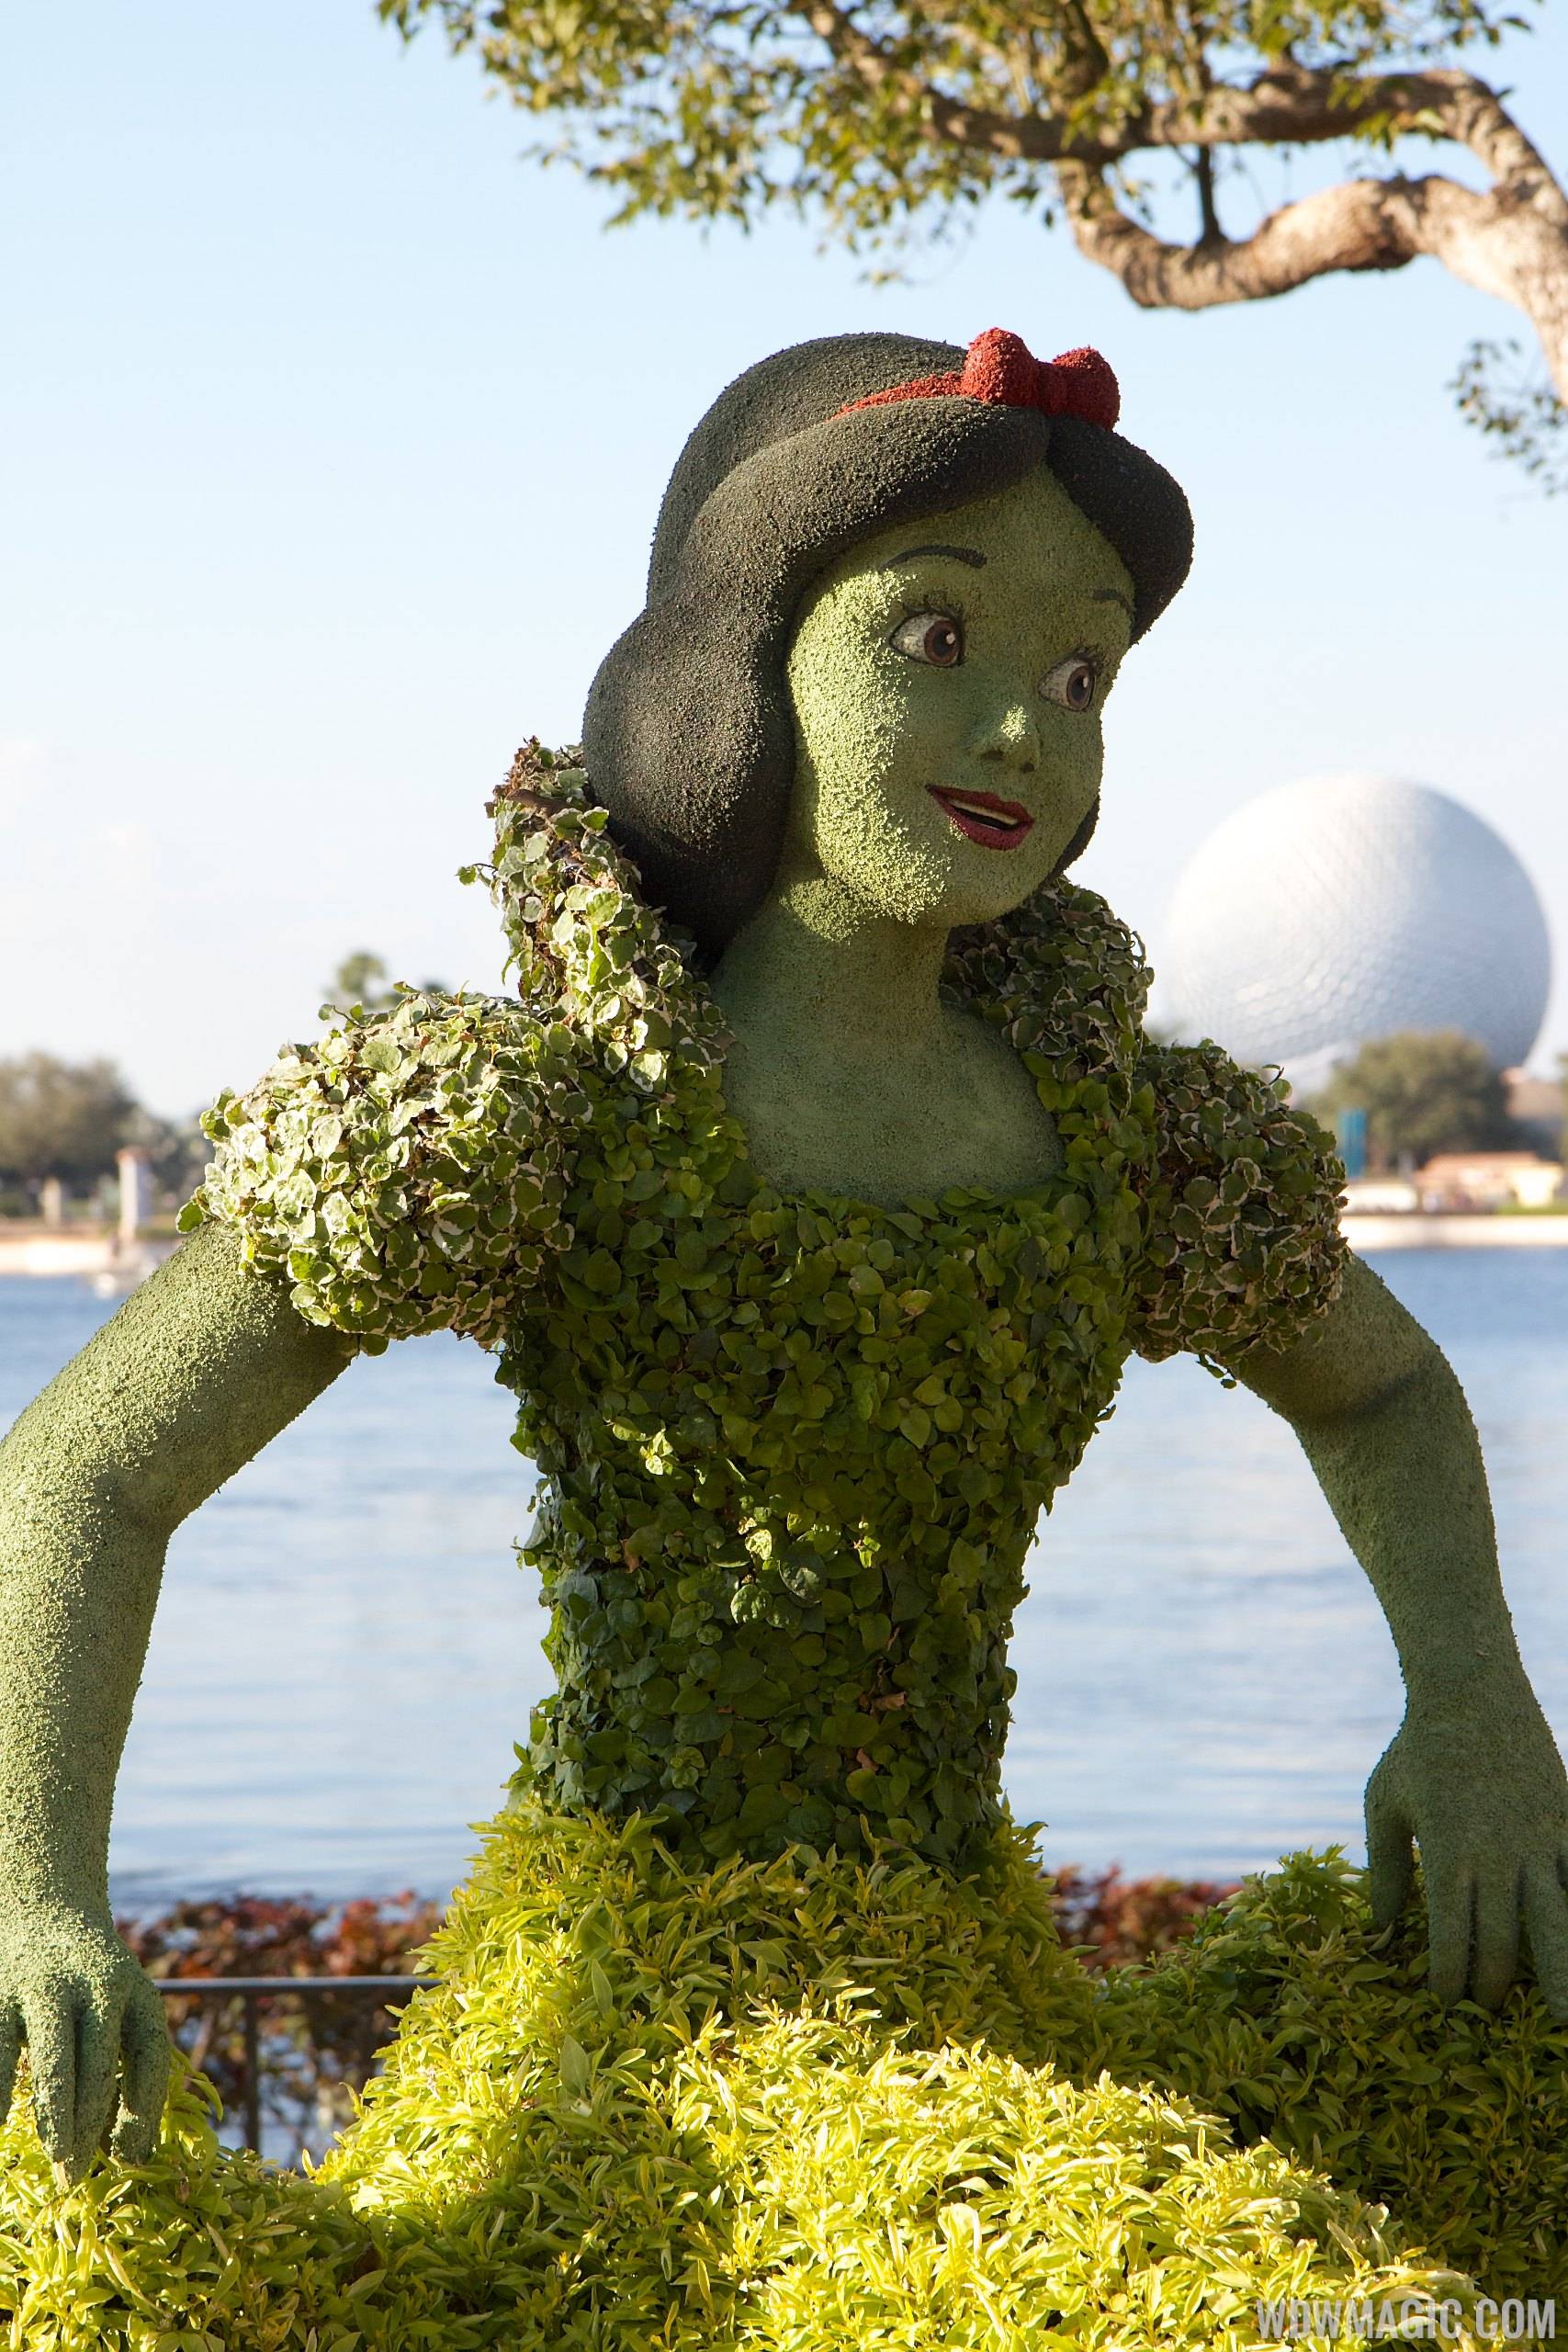 PHOTOS - Topiary installation for Epcot's Flower and Garden Festival now underway